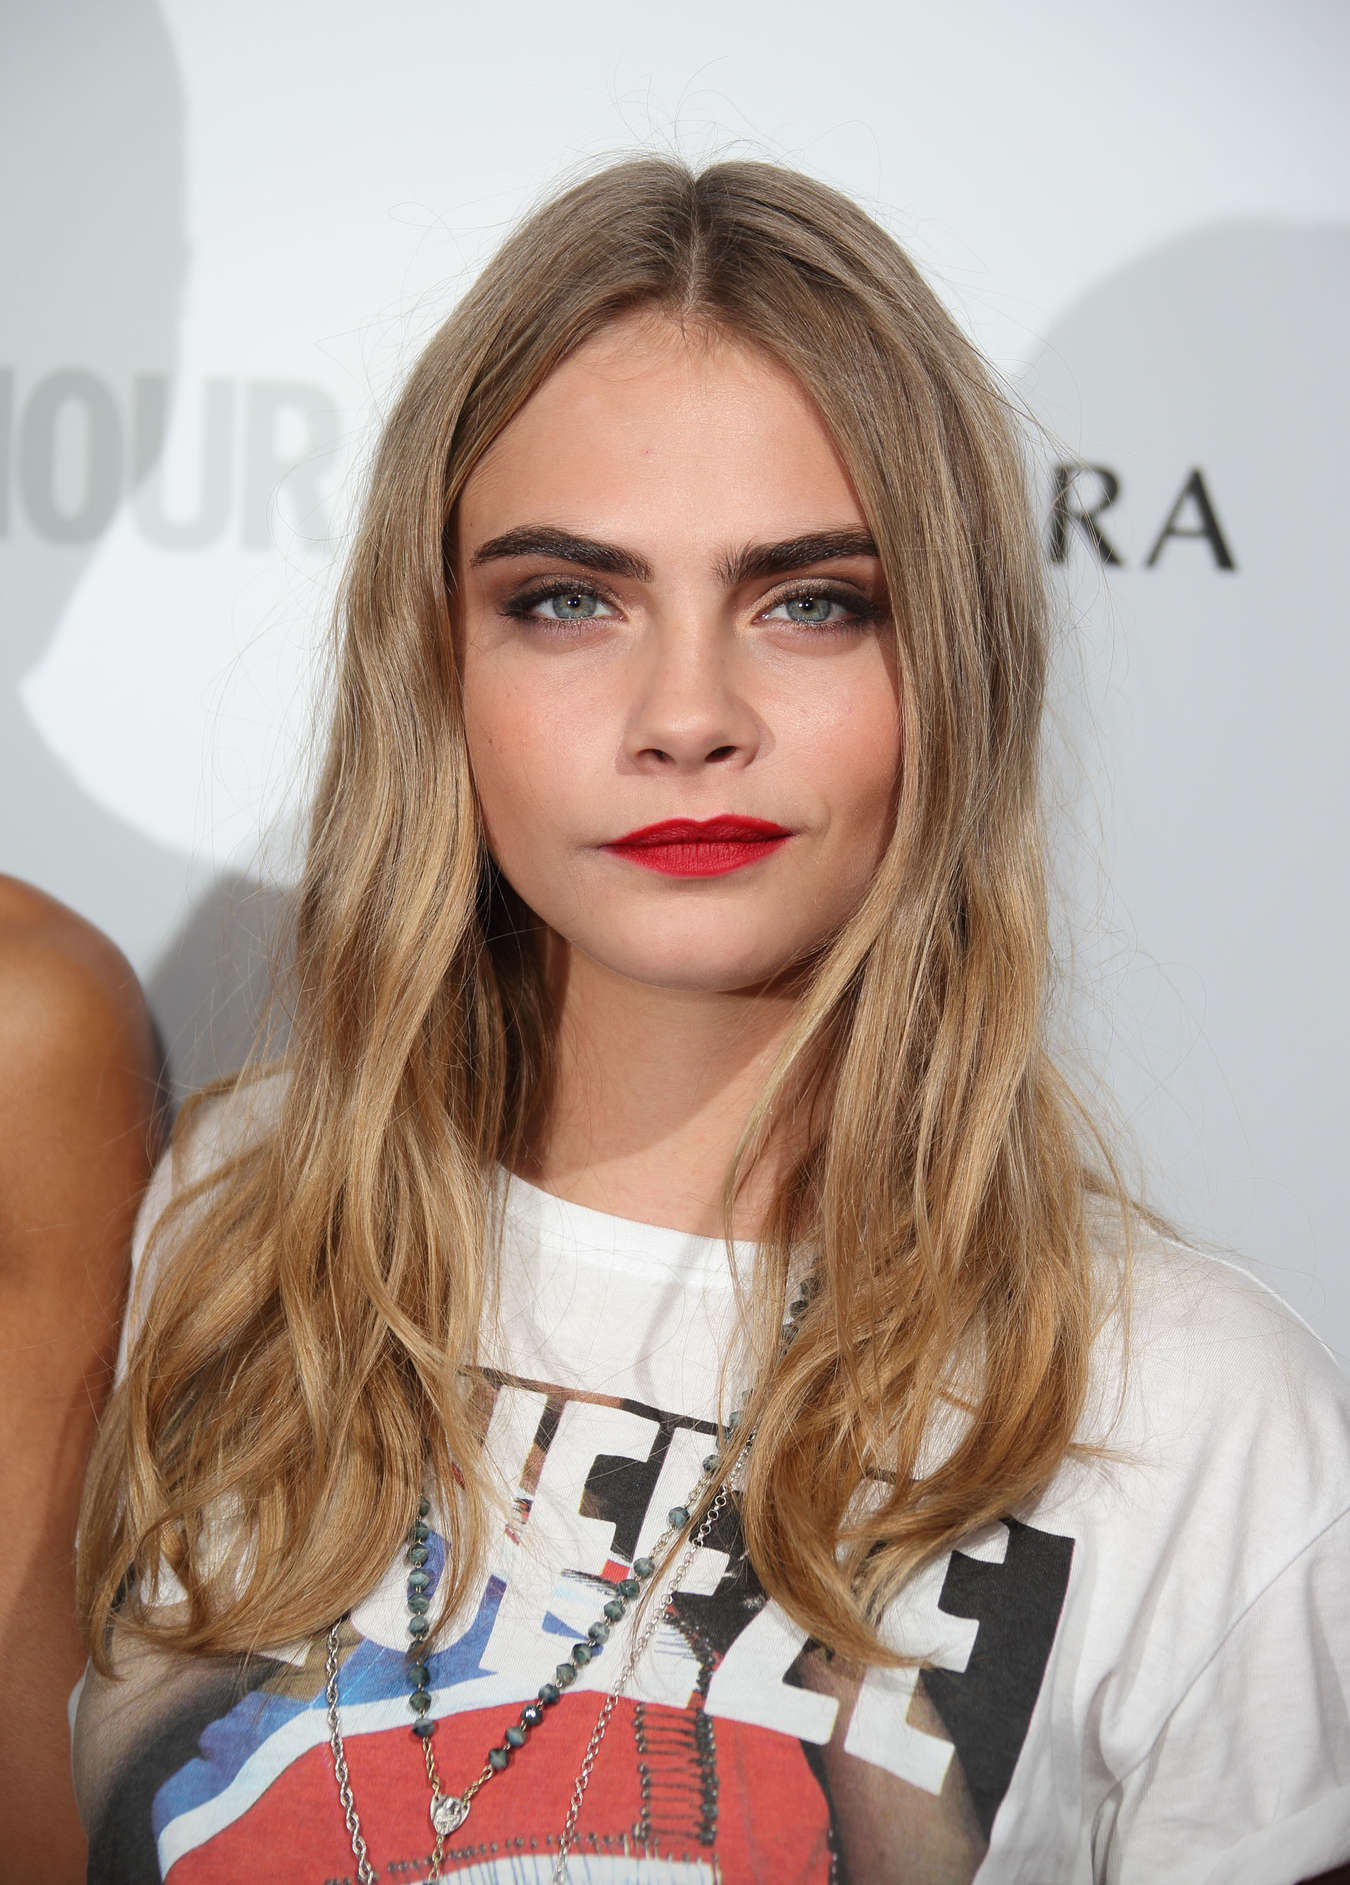 Cara Delevingne at 2013 Glamour Women Of The Year Awards